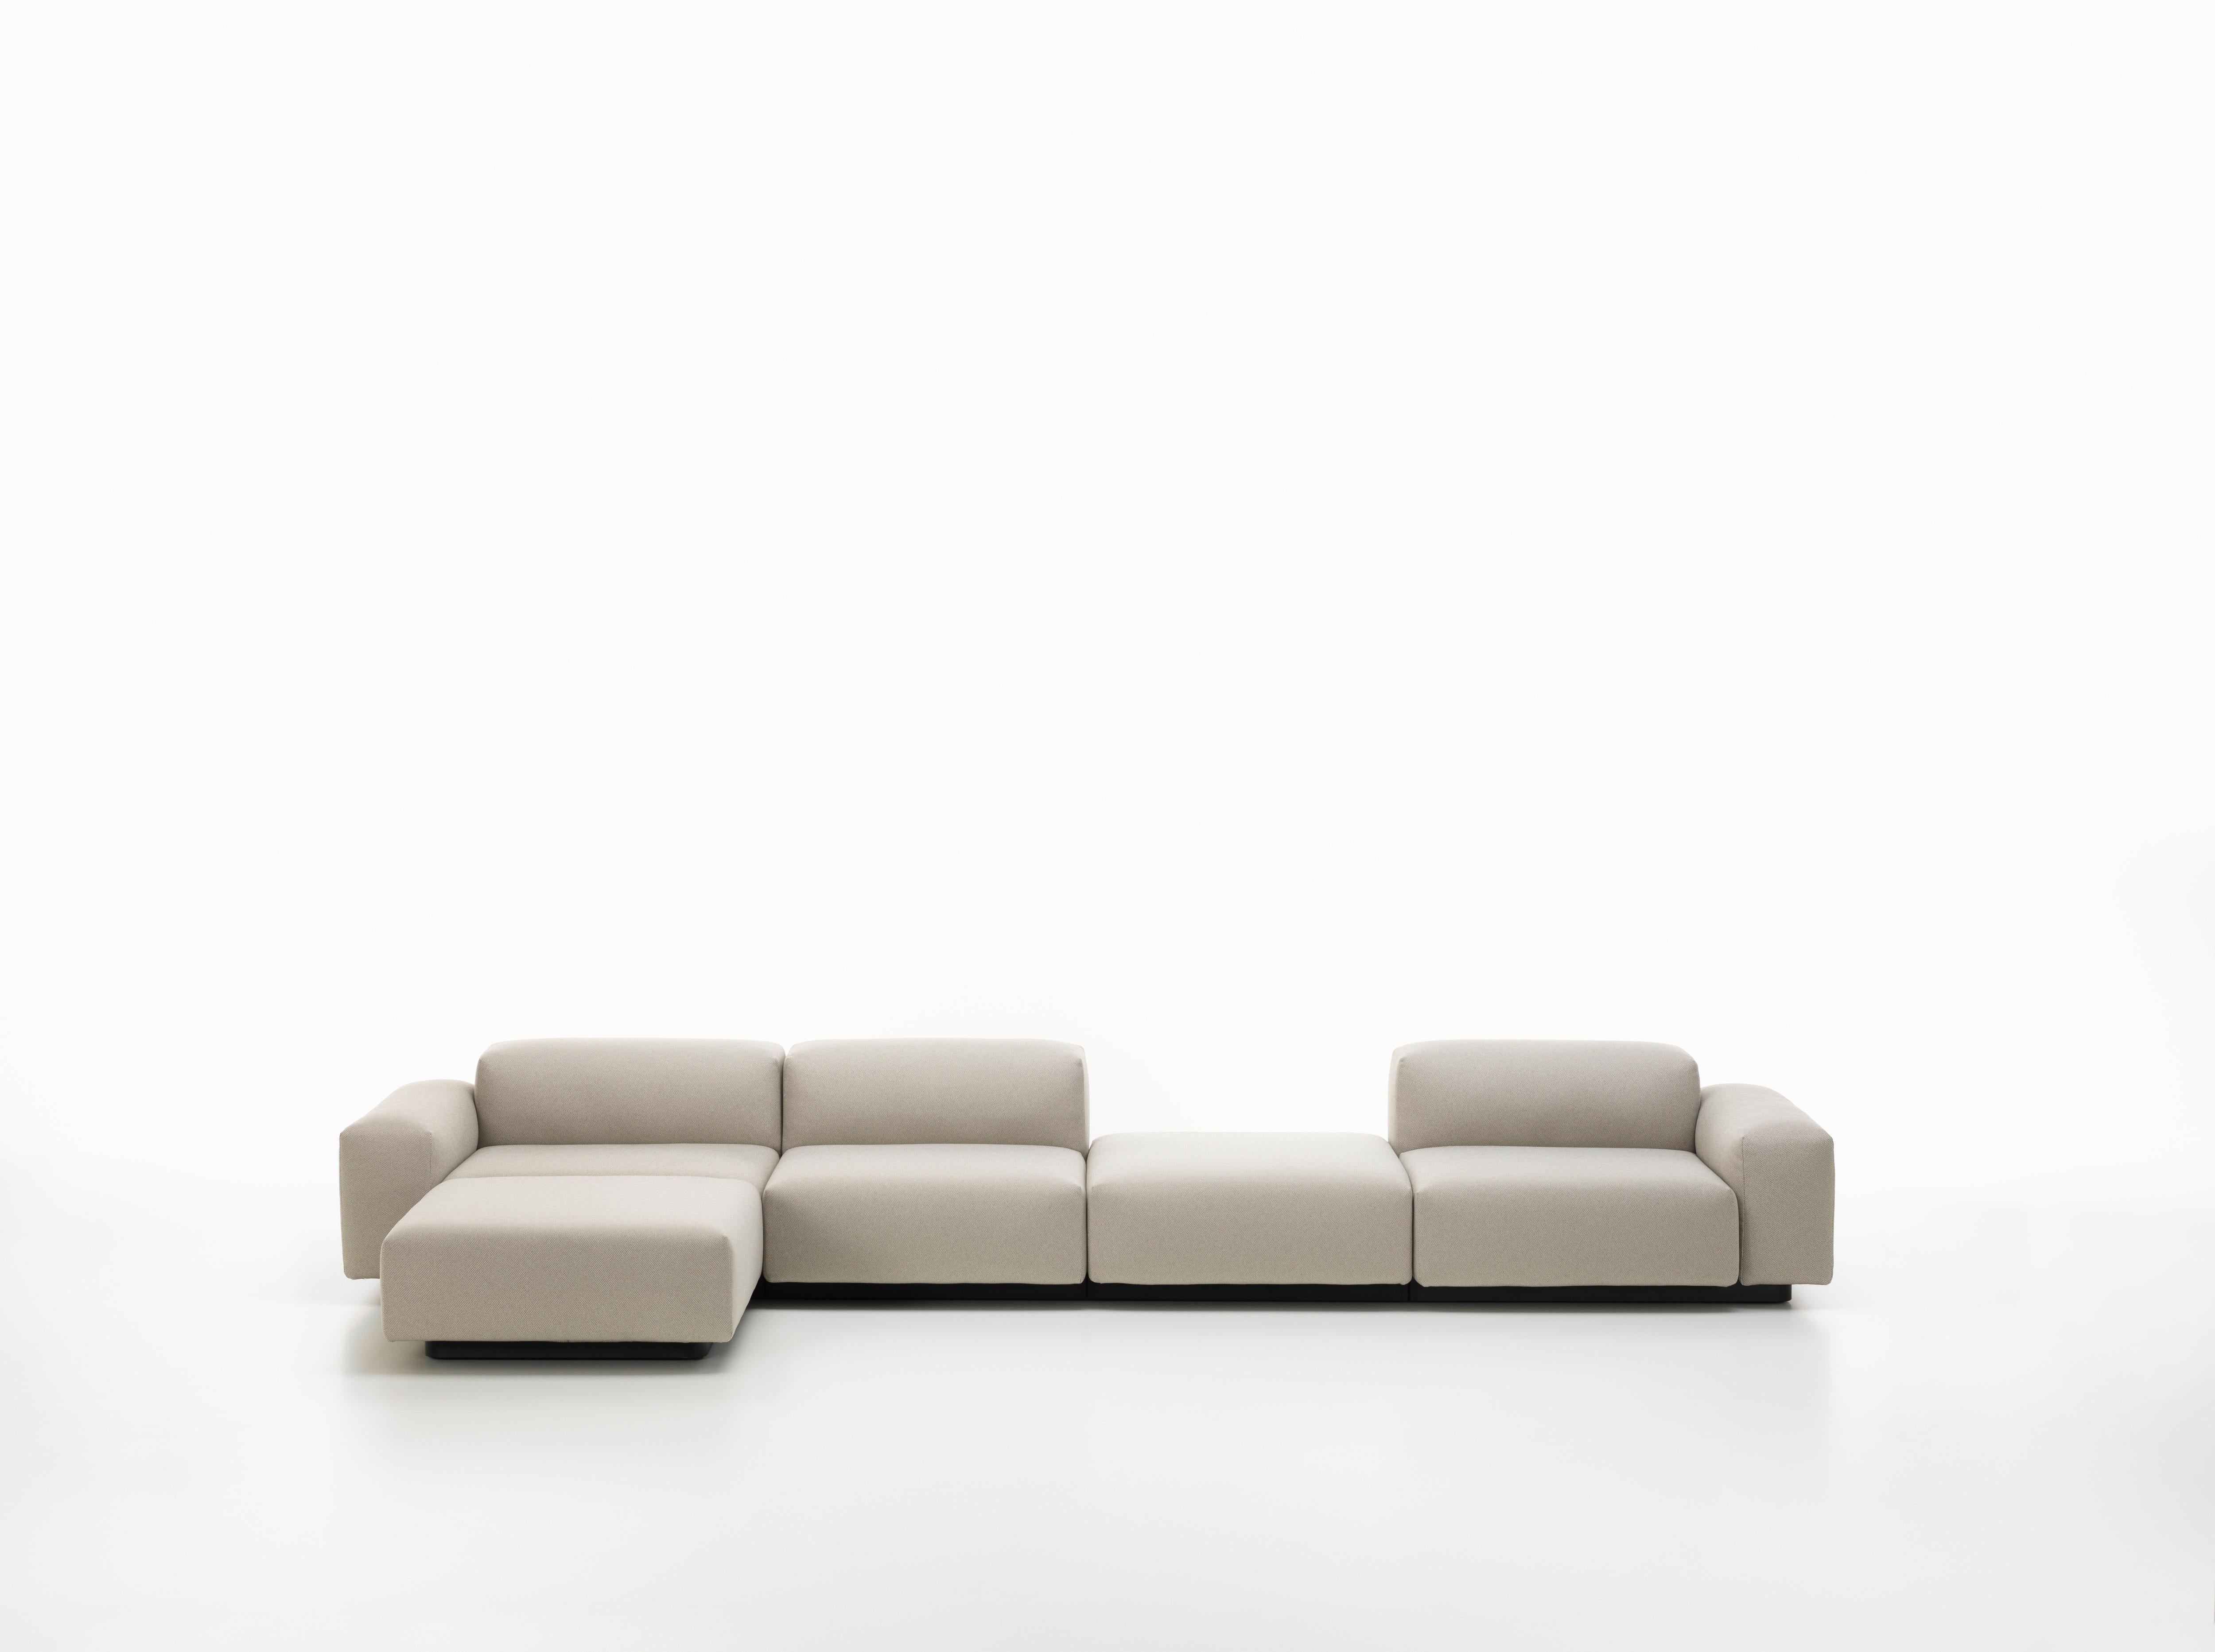 Swiss Vitra Soft Modular 4-Seat Sofa with Chaise Lounge & Platform in Pearl Olimpo For Sale